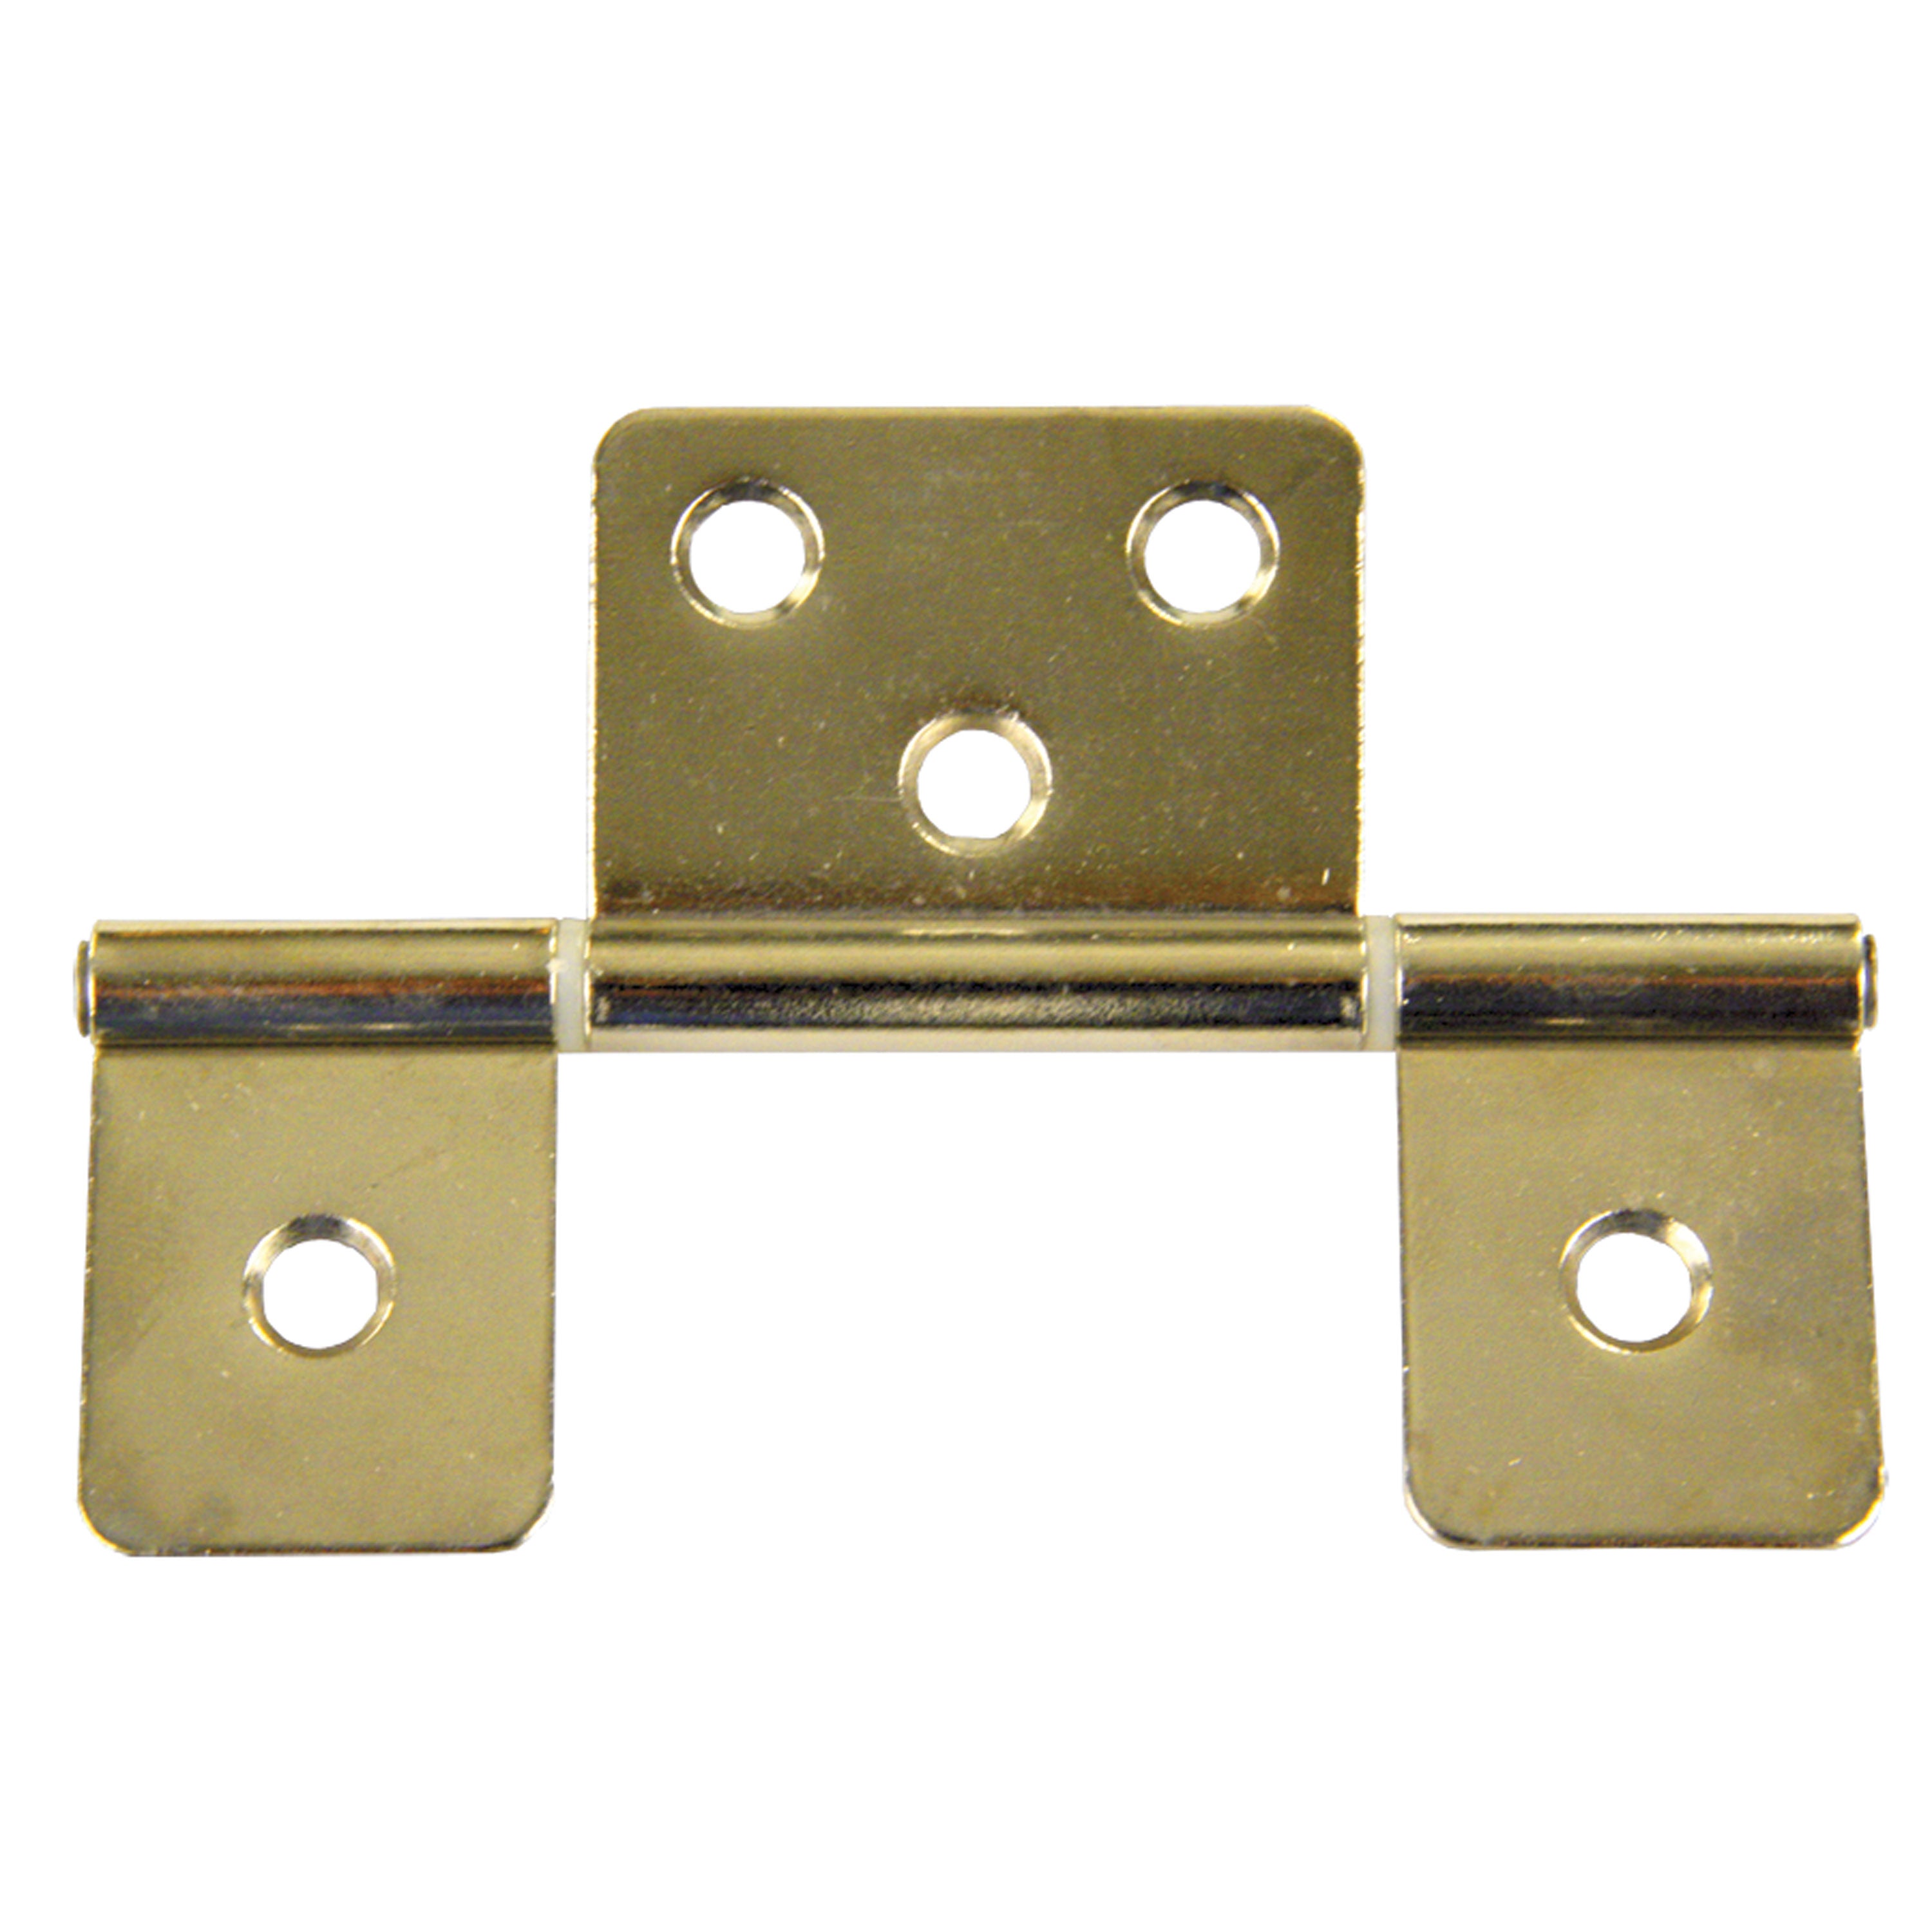 JR Products 70625 Non-Mortise Hinge - Brass